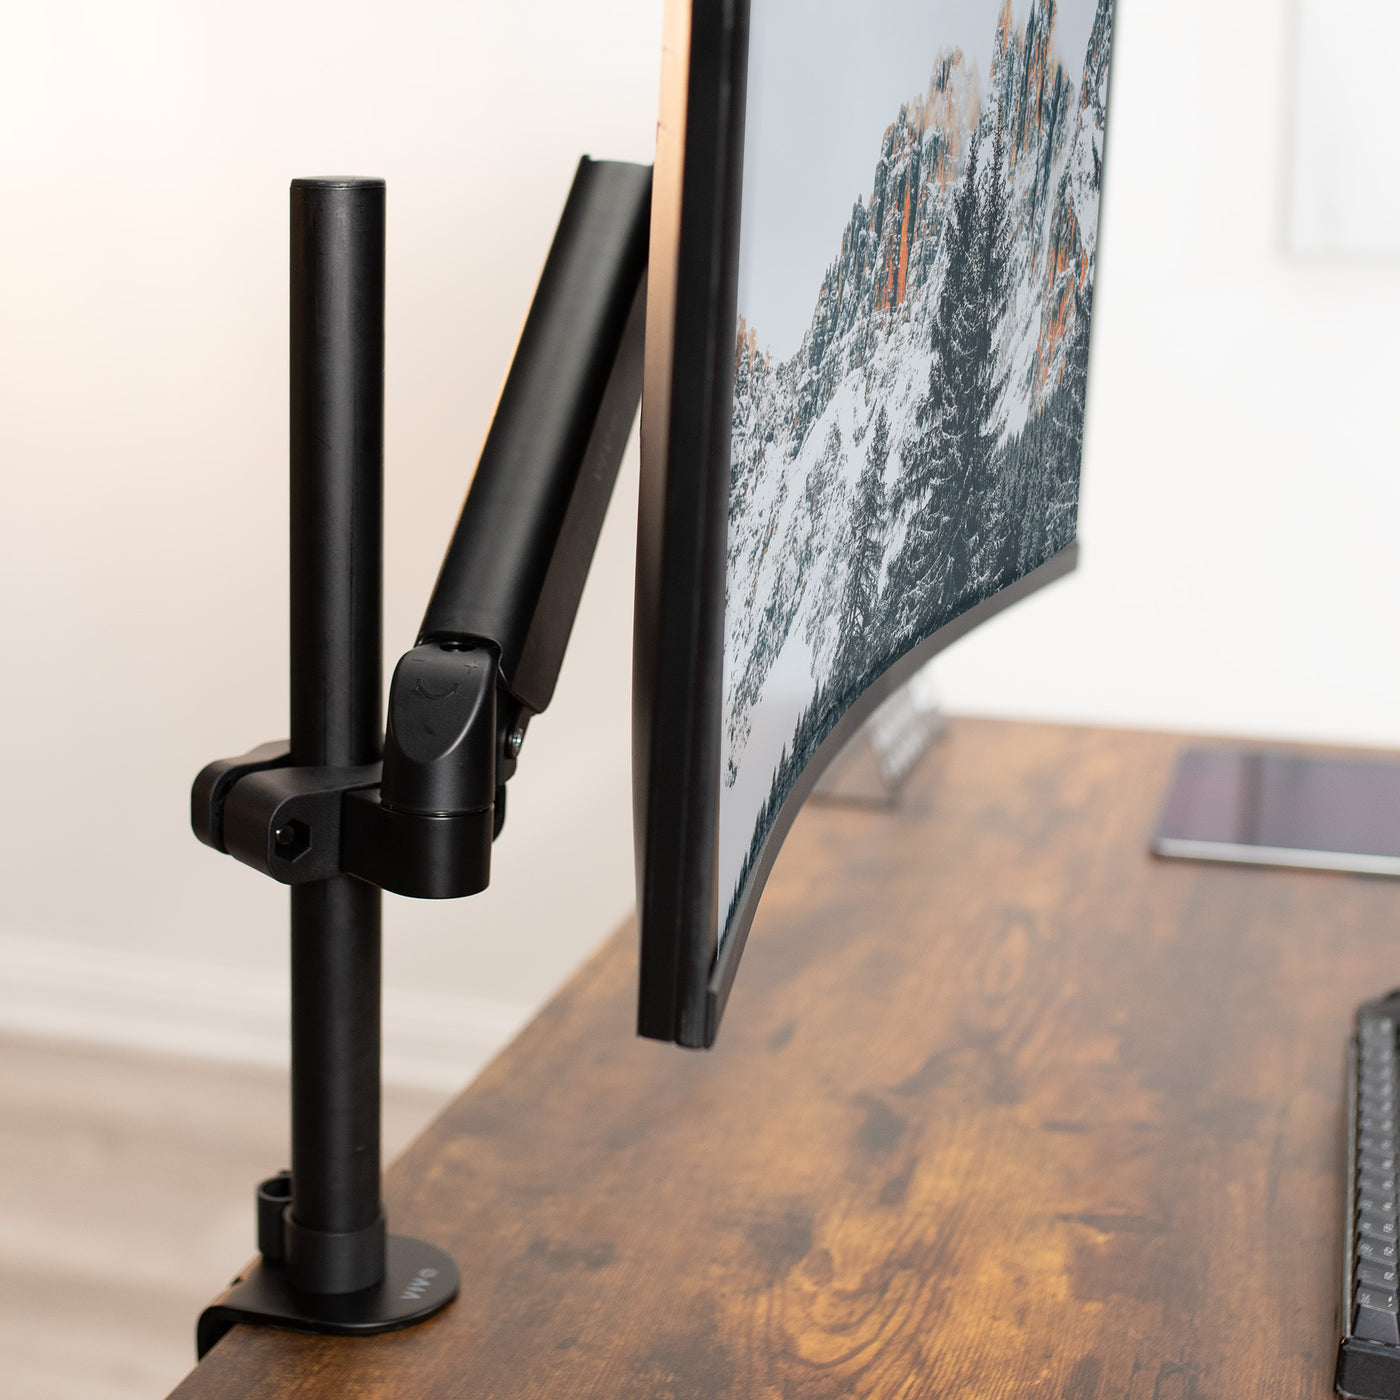 Adjustable monitor mount arm supporting large screen. 